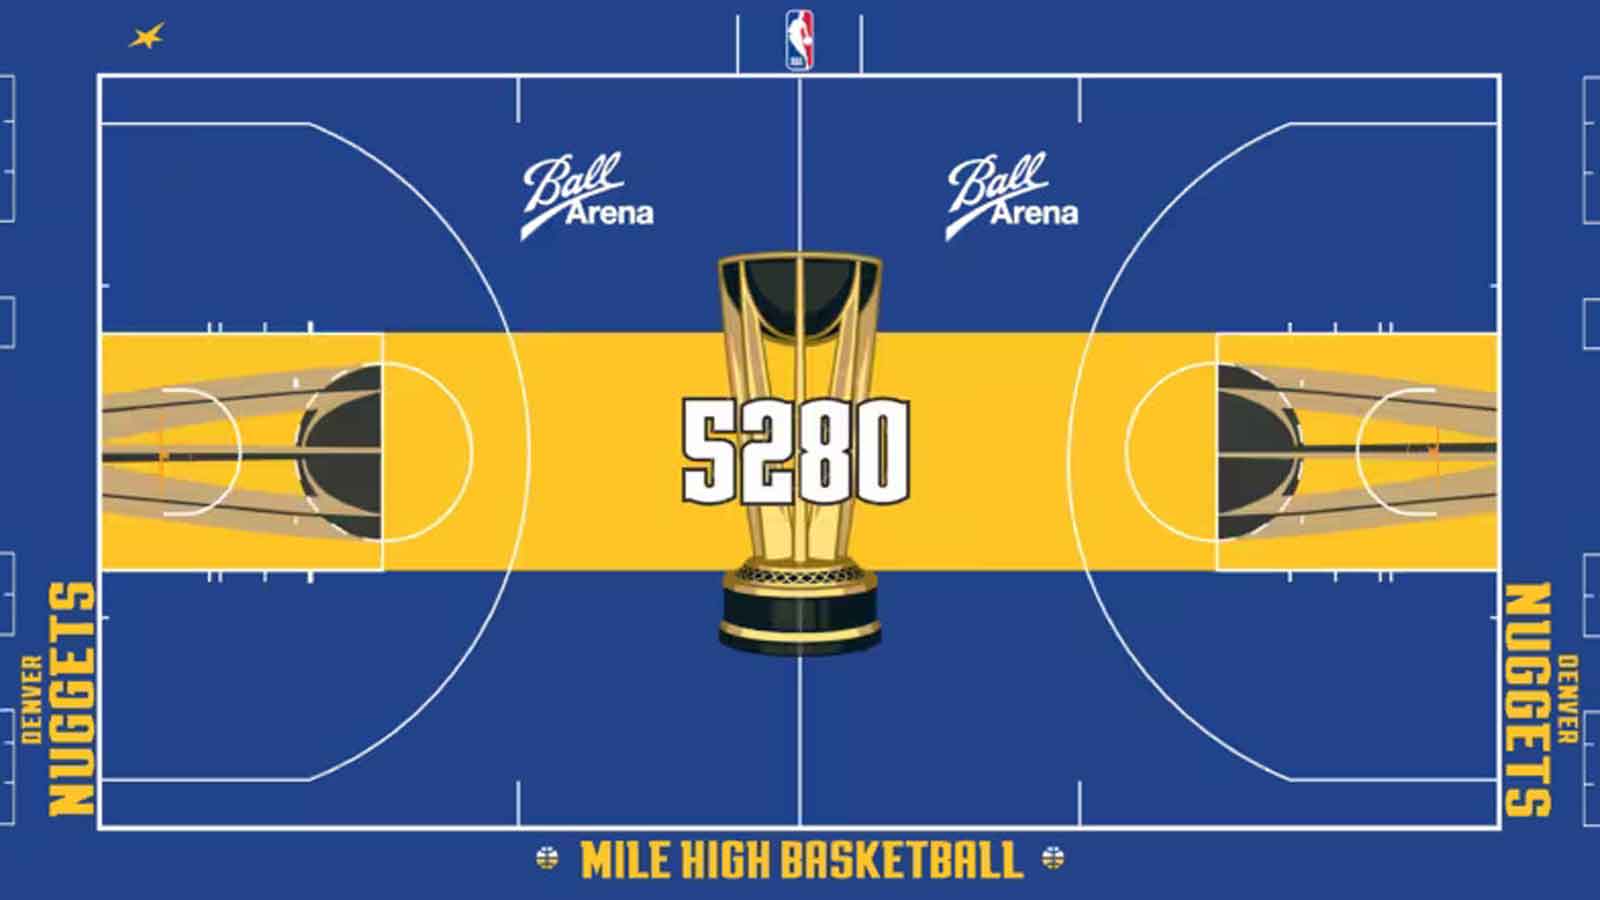 Understanding how the new NBA In-Season Tournament works and why